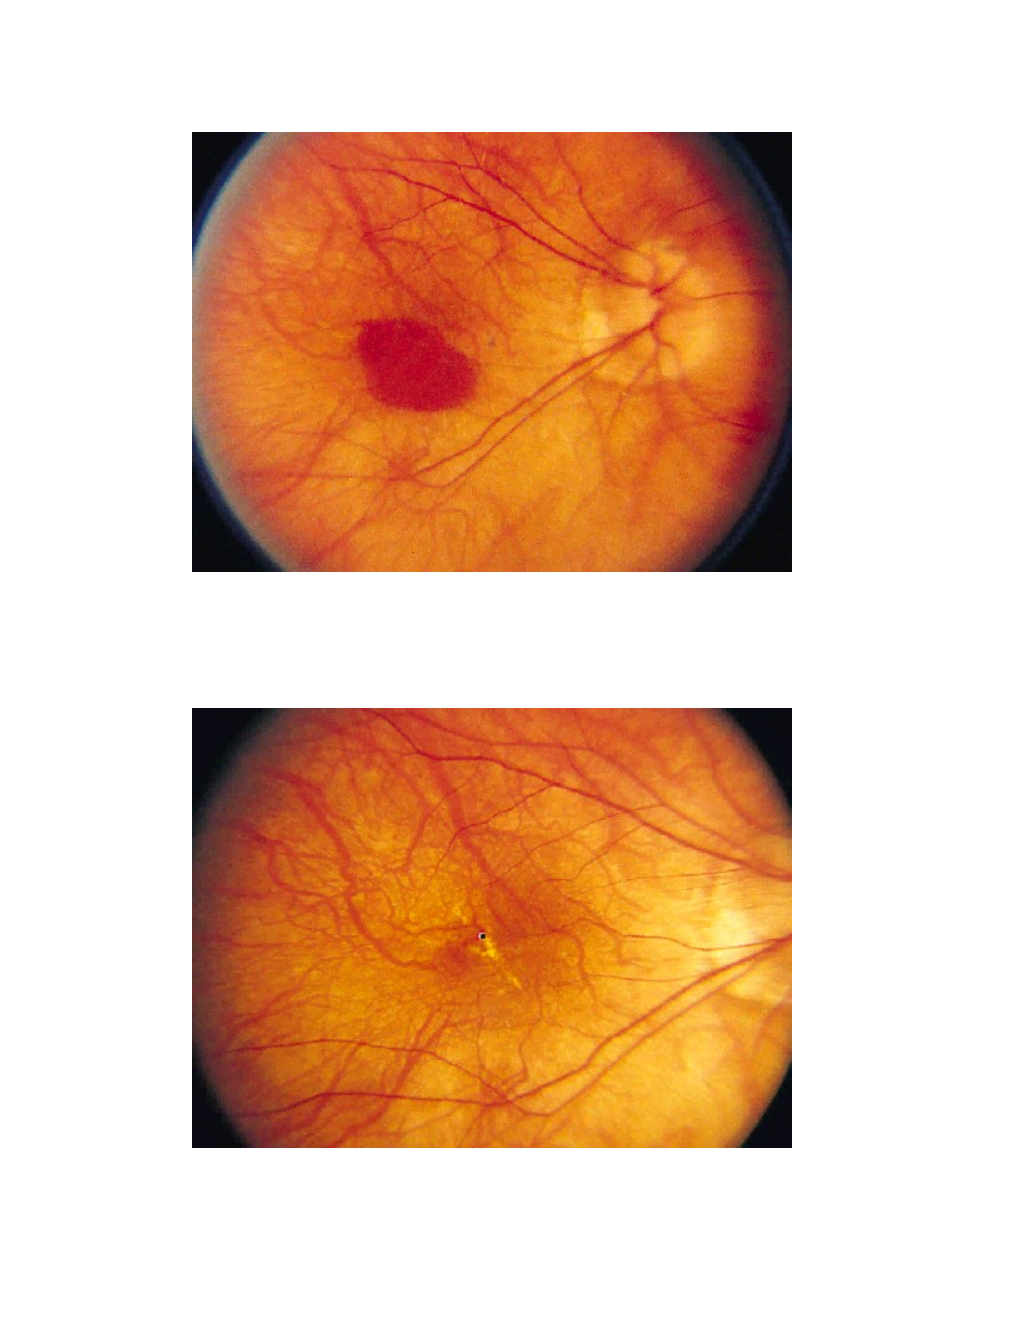 Q: a 28-Year-Old Caucasian Woman Experienced a Central Light Flash Followed by Blurred Vision